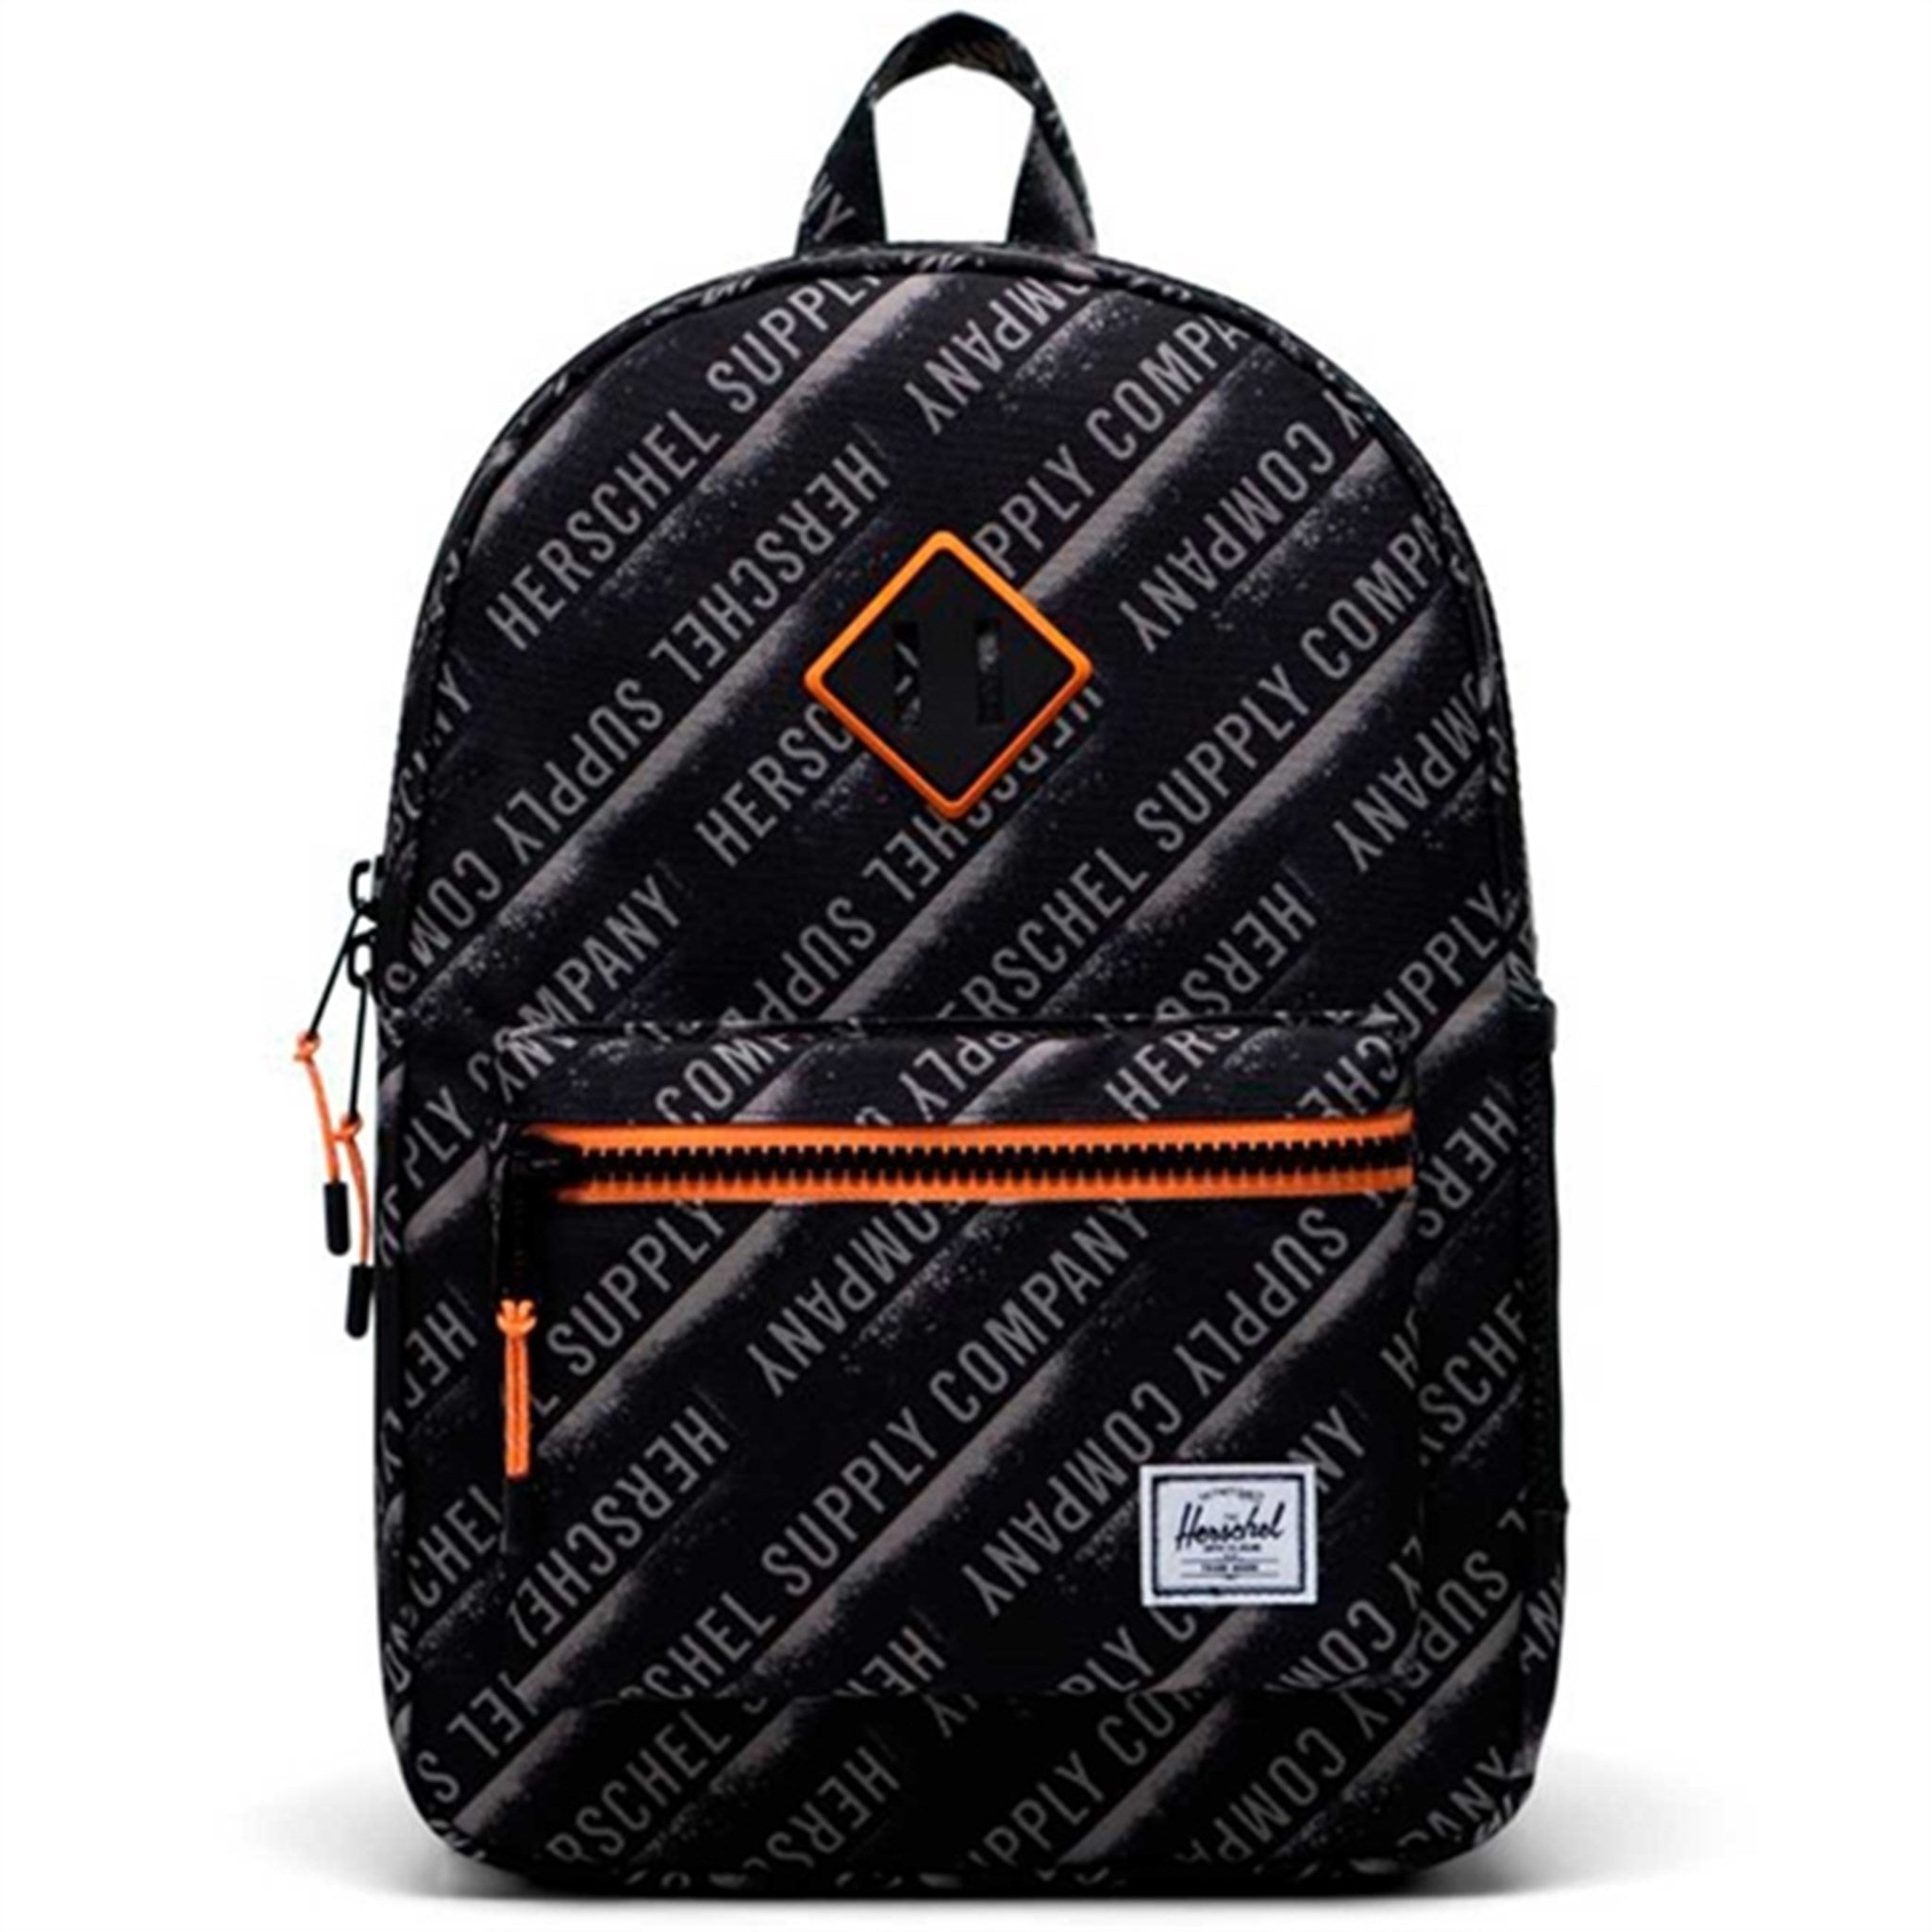 Herschel Backpack Youth Stencil Roll Call/Orange Popsicle